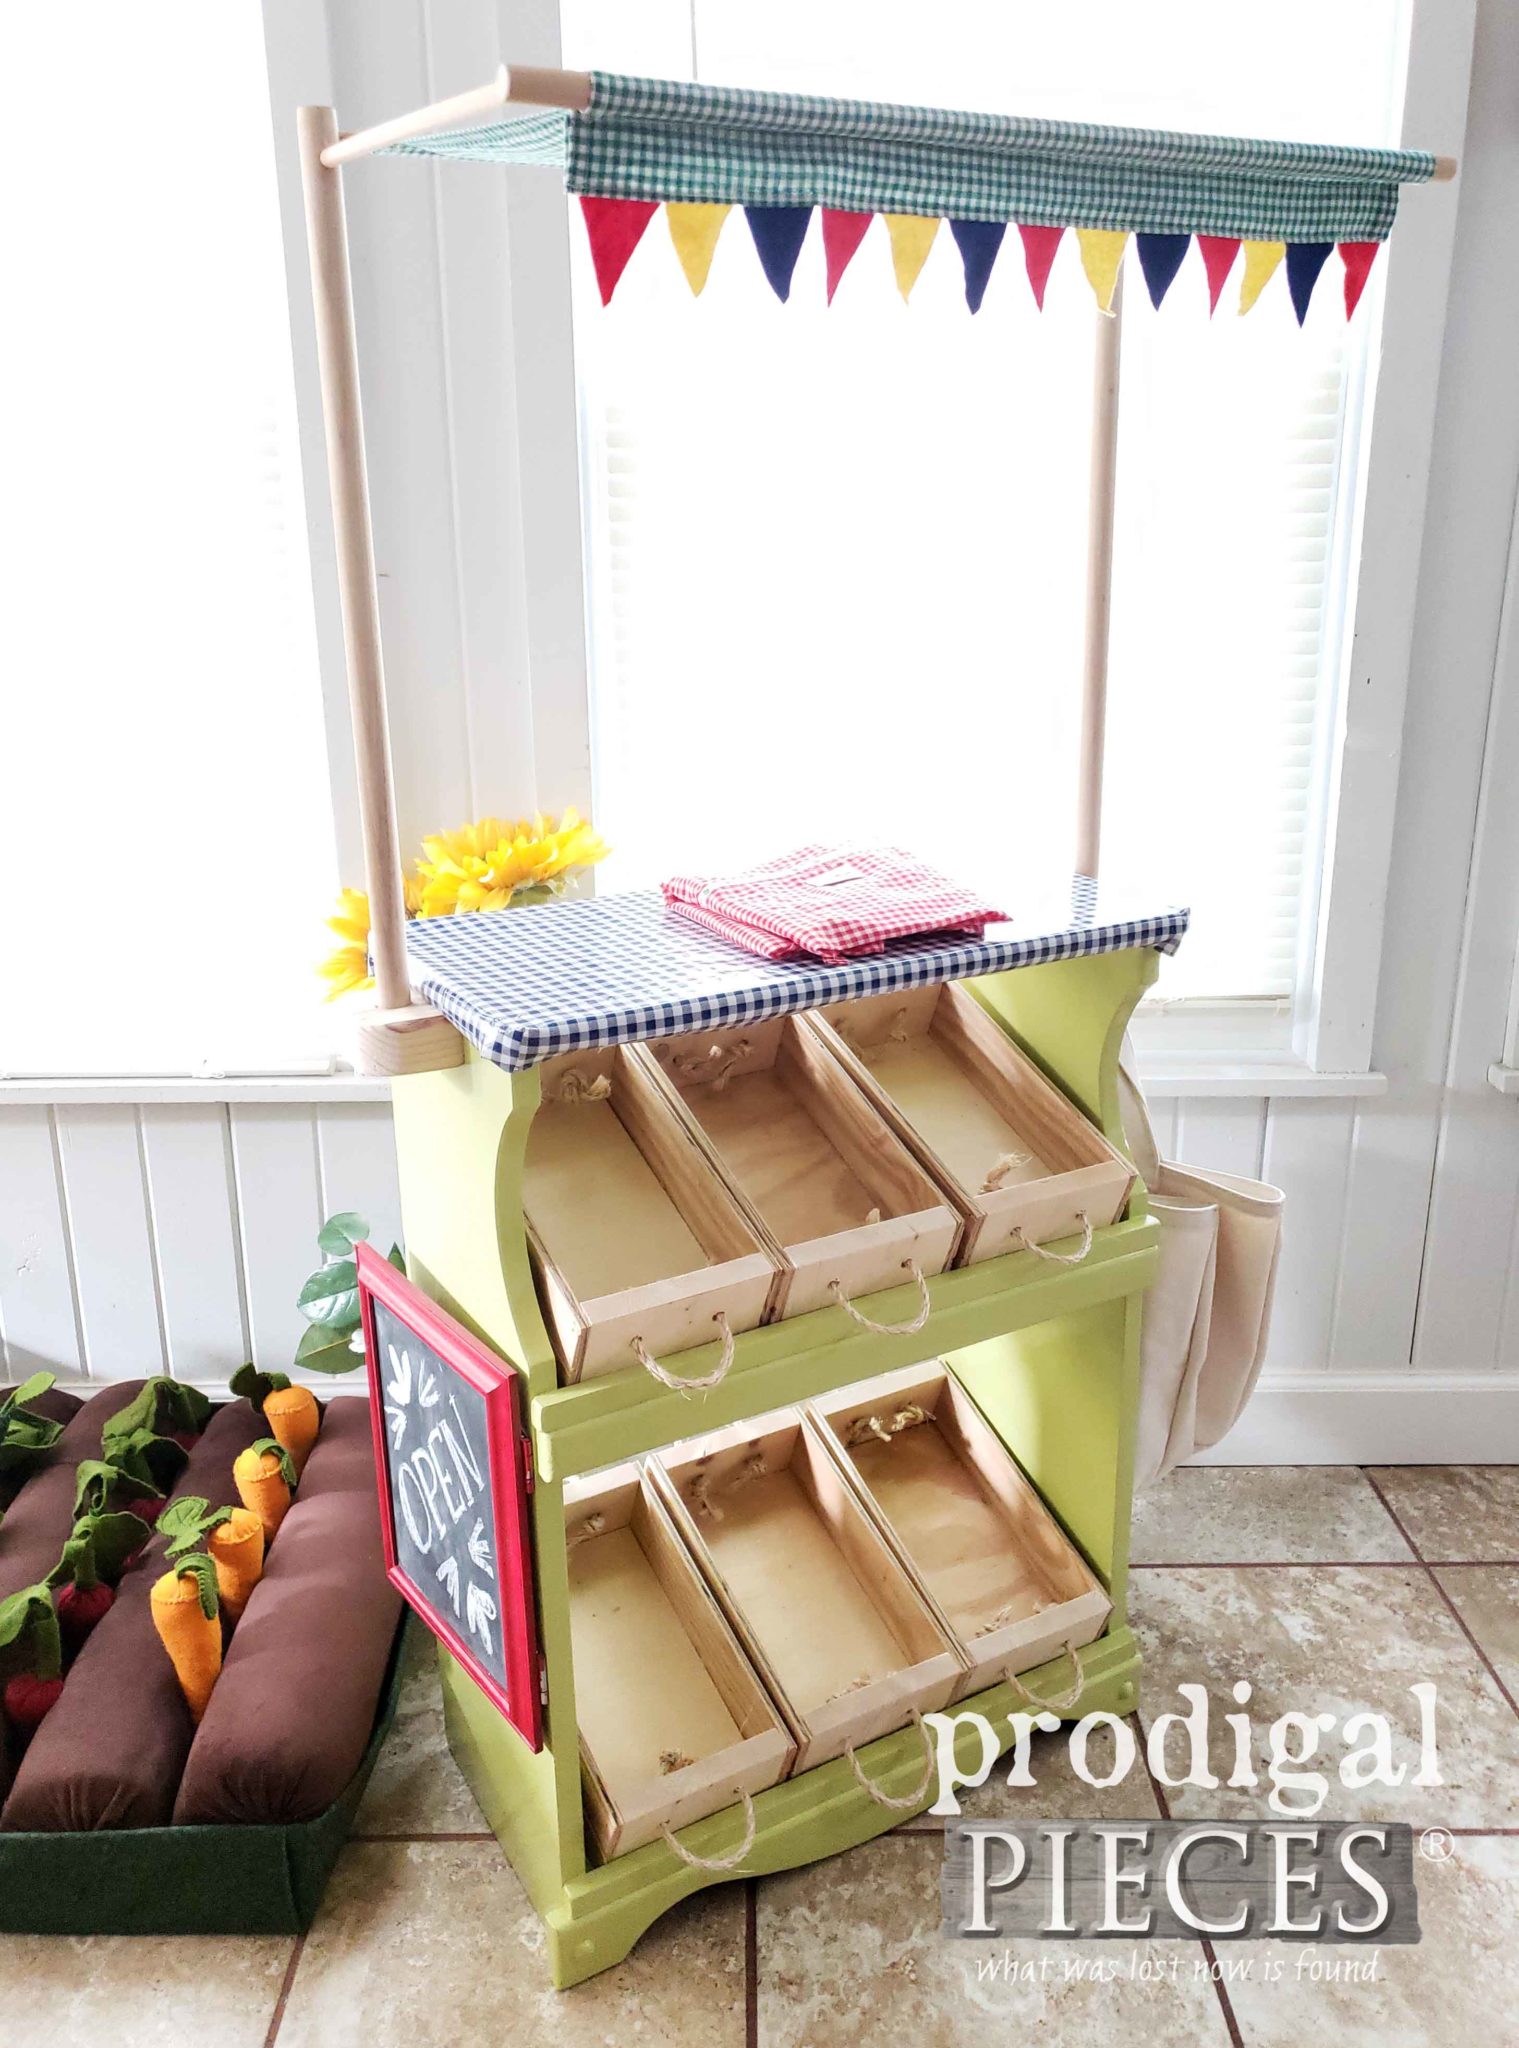 Pretend Play Market Stand Built by Larissa of Prodigal Pieces from Upcycled Bookcase | prodigalpieces.com